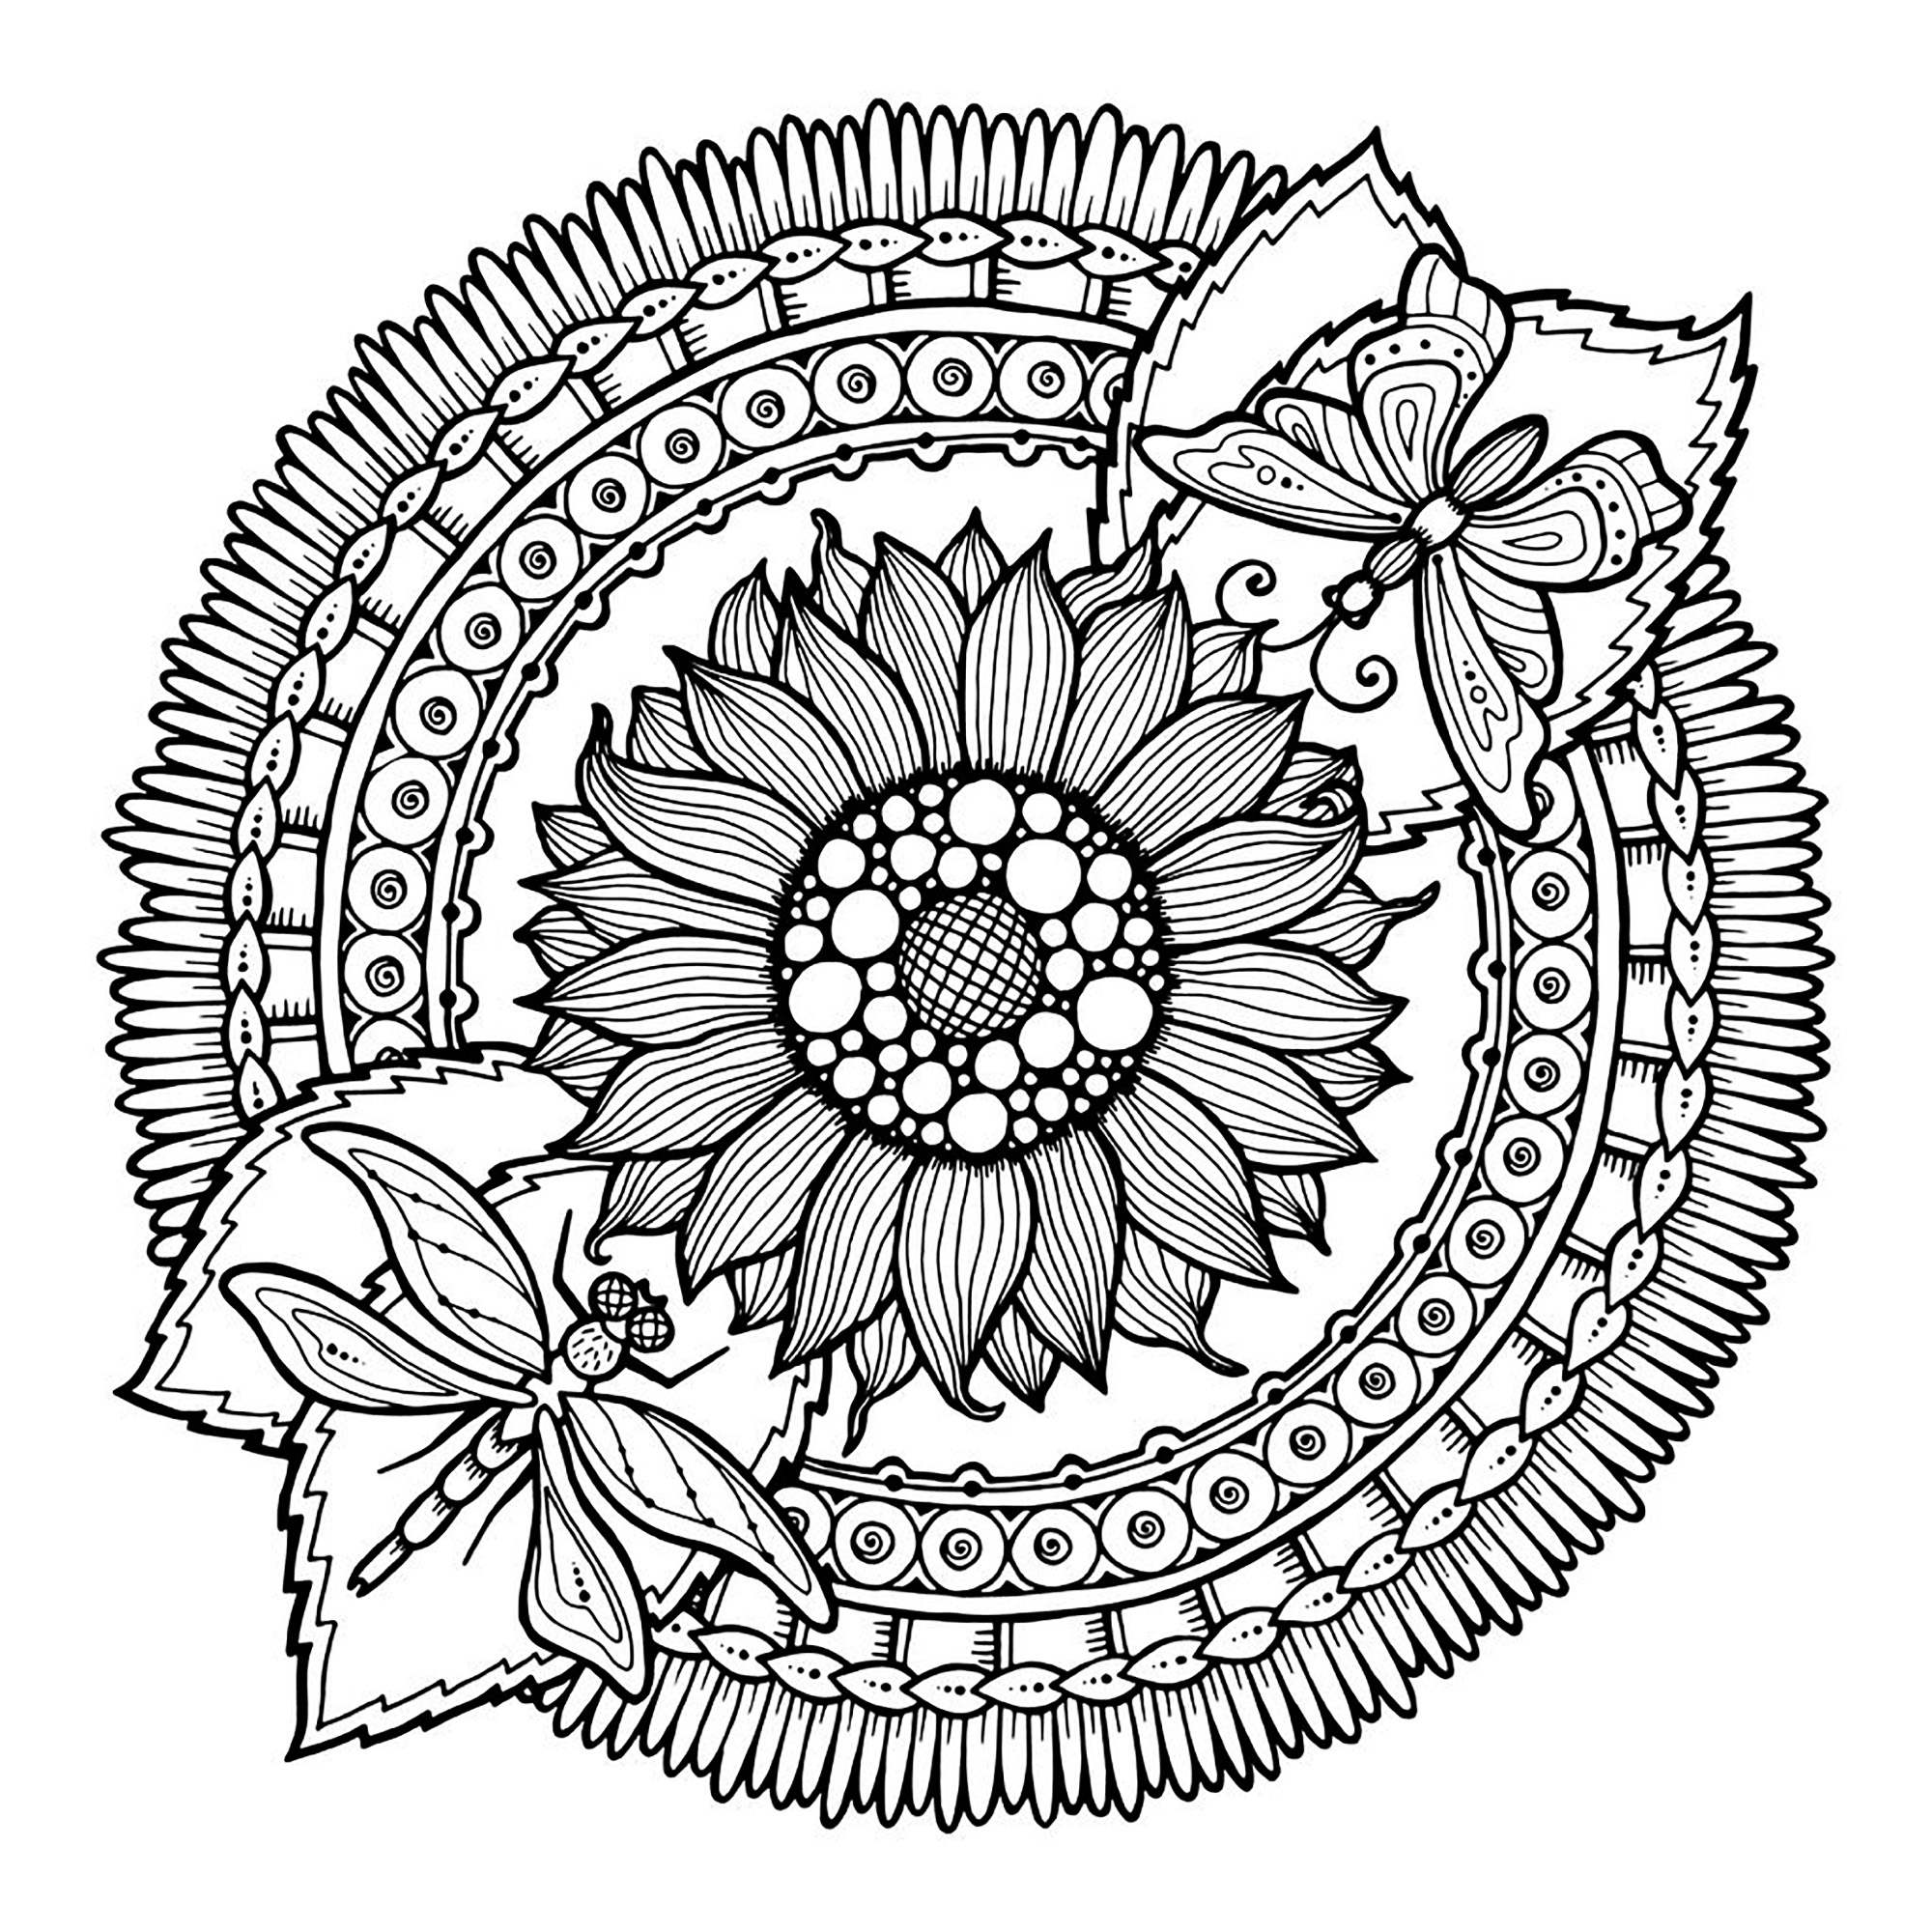 Download Mandala dragonfly and flowers - Mandalas Adult Coloring Pages